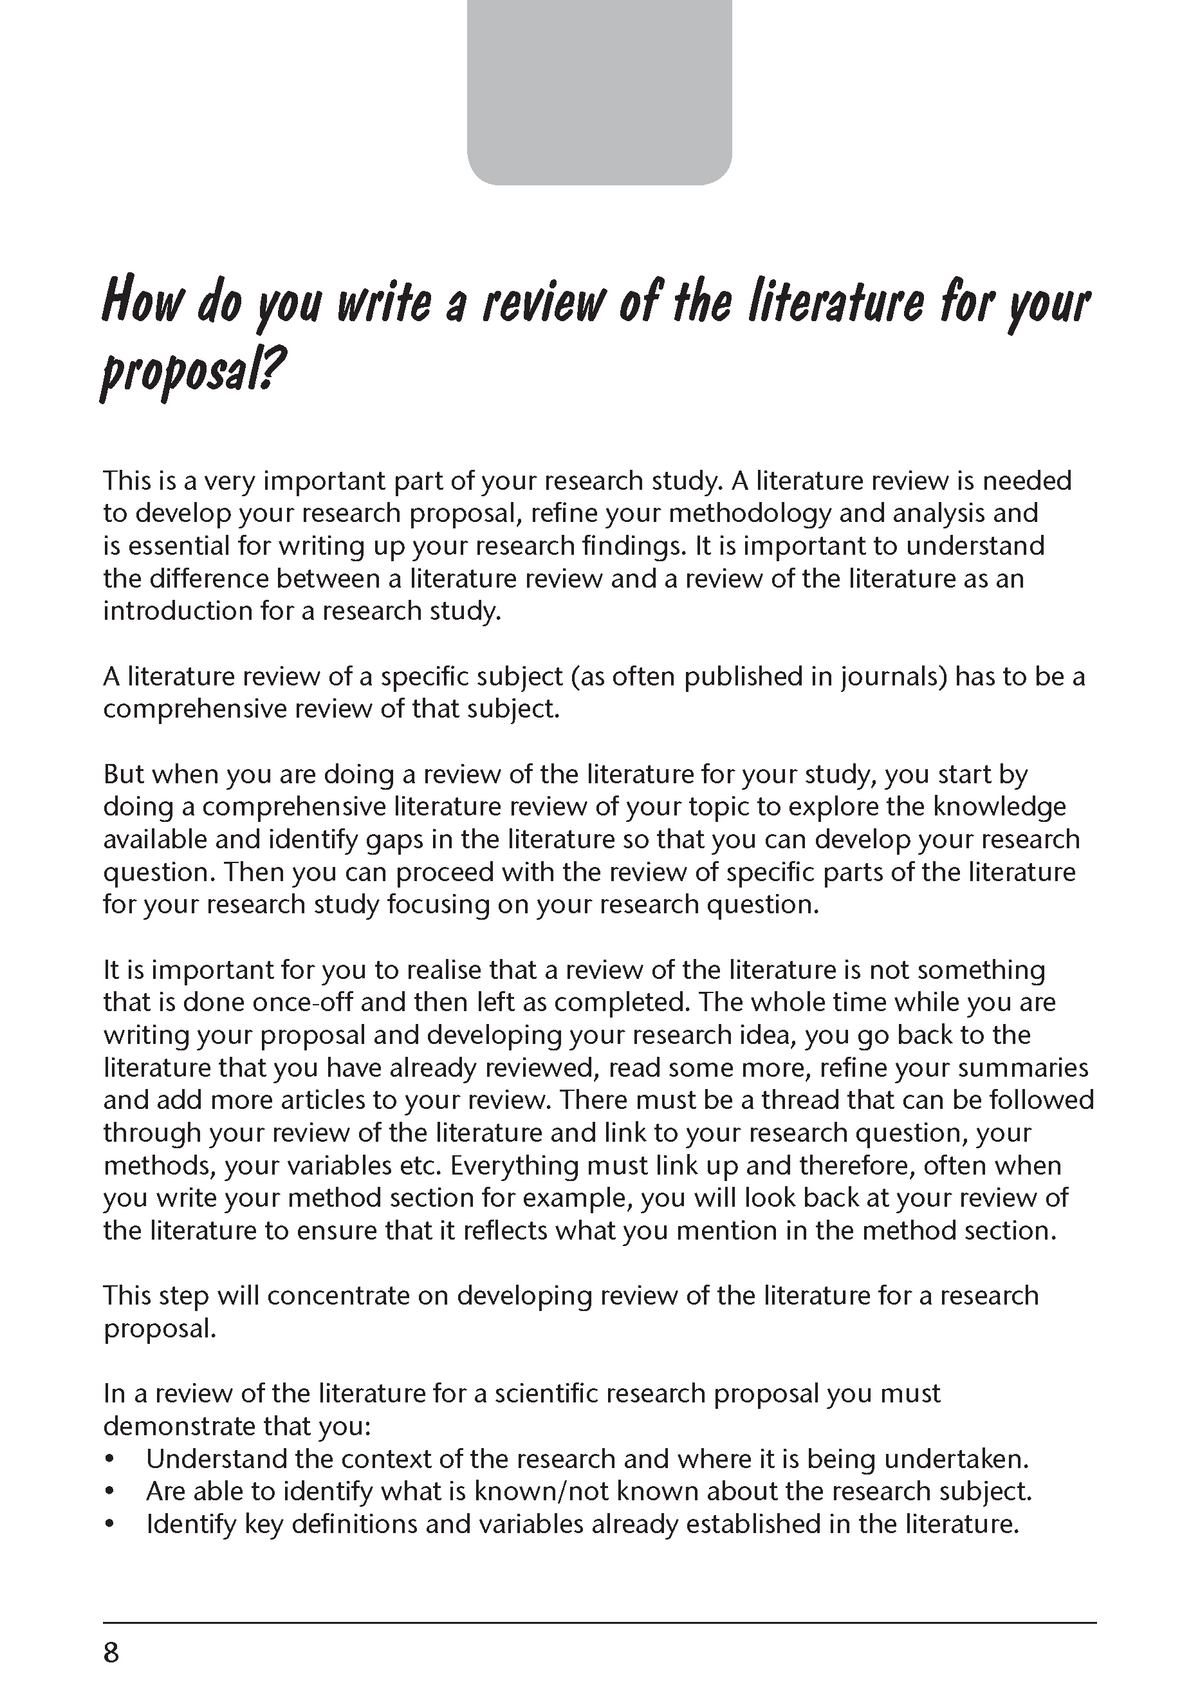 literature review in a proposal